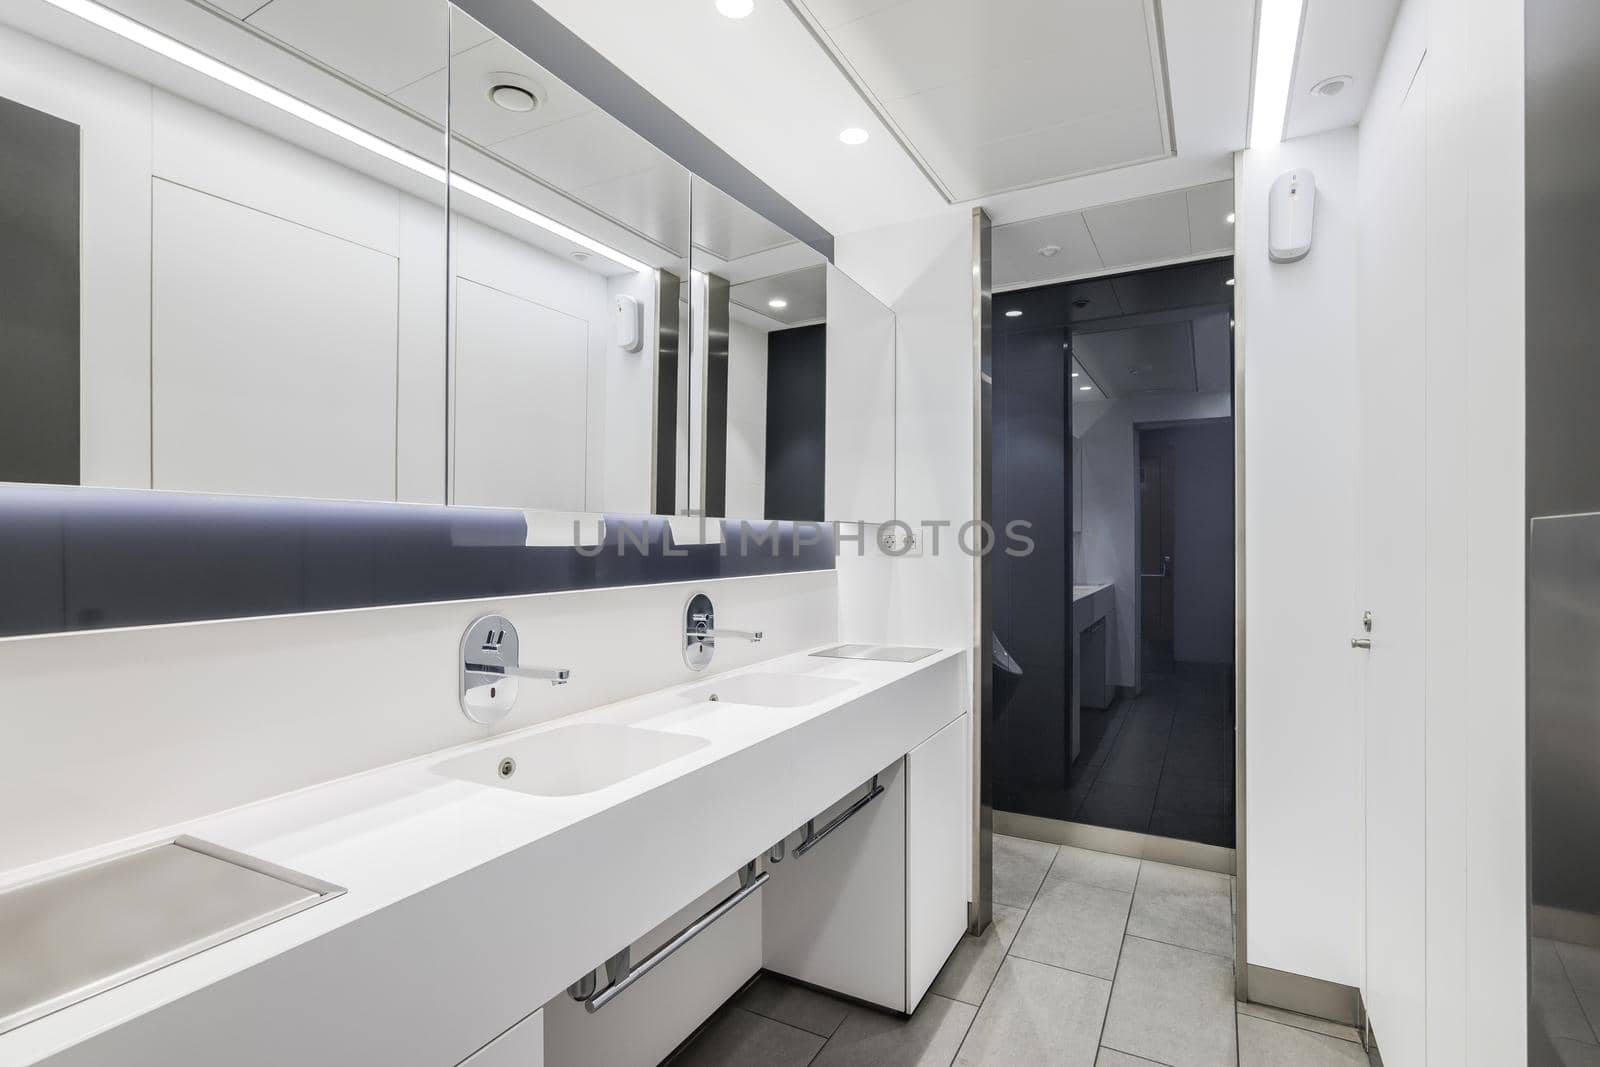 Public or office interior of male restroom with sinks and big mirror. Modern design bathroom in white color